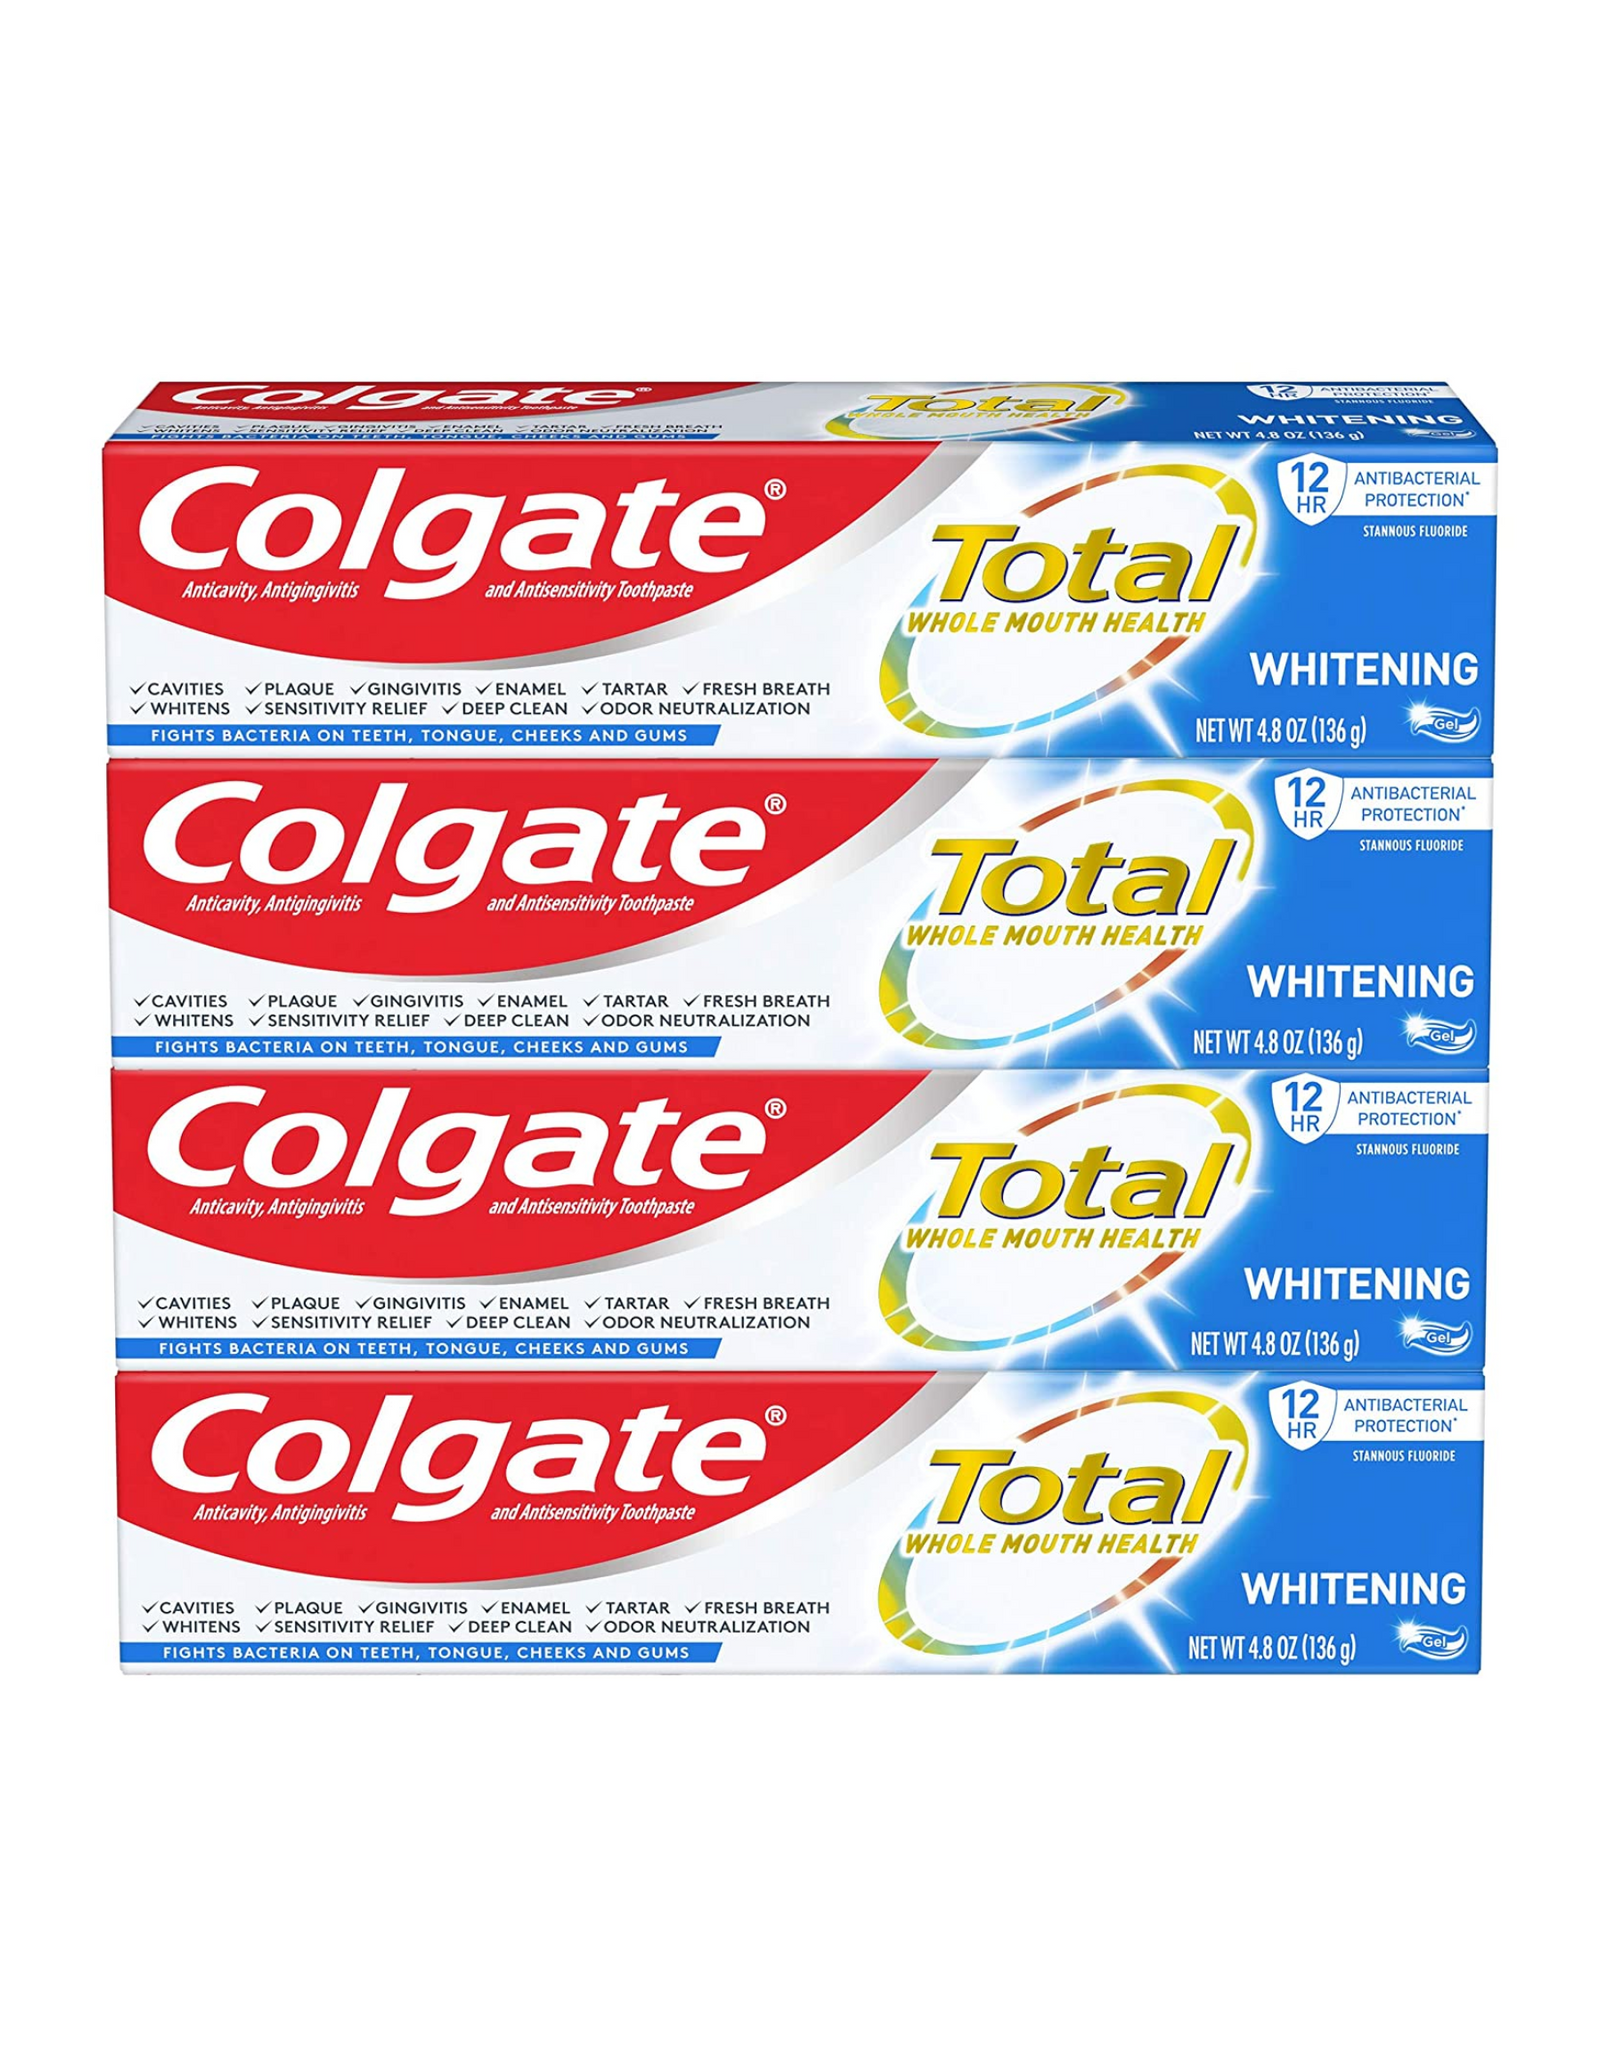 Colgate Total Whitening Toothpaste Gel, Stannous Fluoride and Zinc, Original, Whitening Mint, 4.8 oz each (Pack of 4)